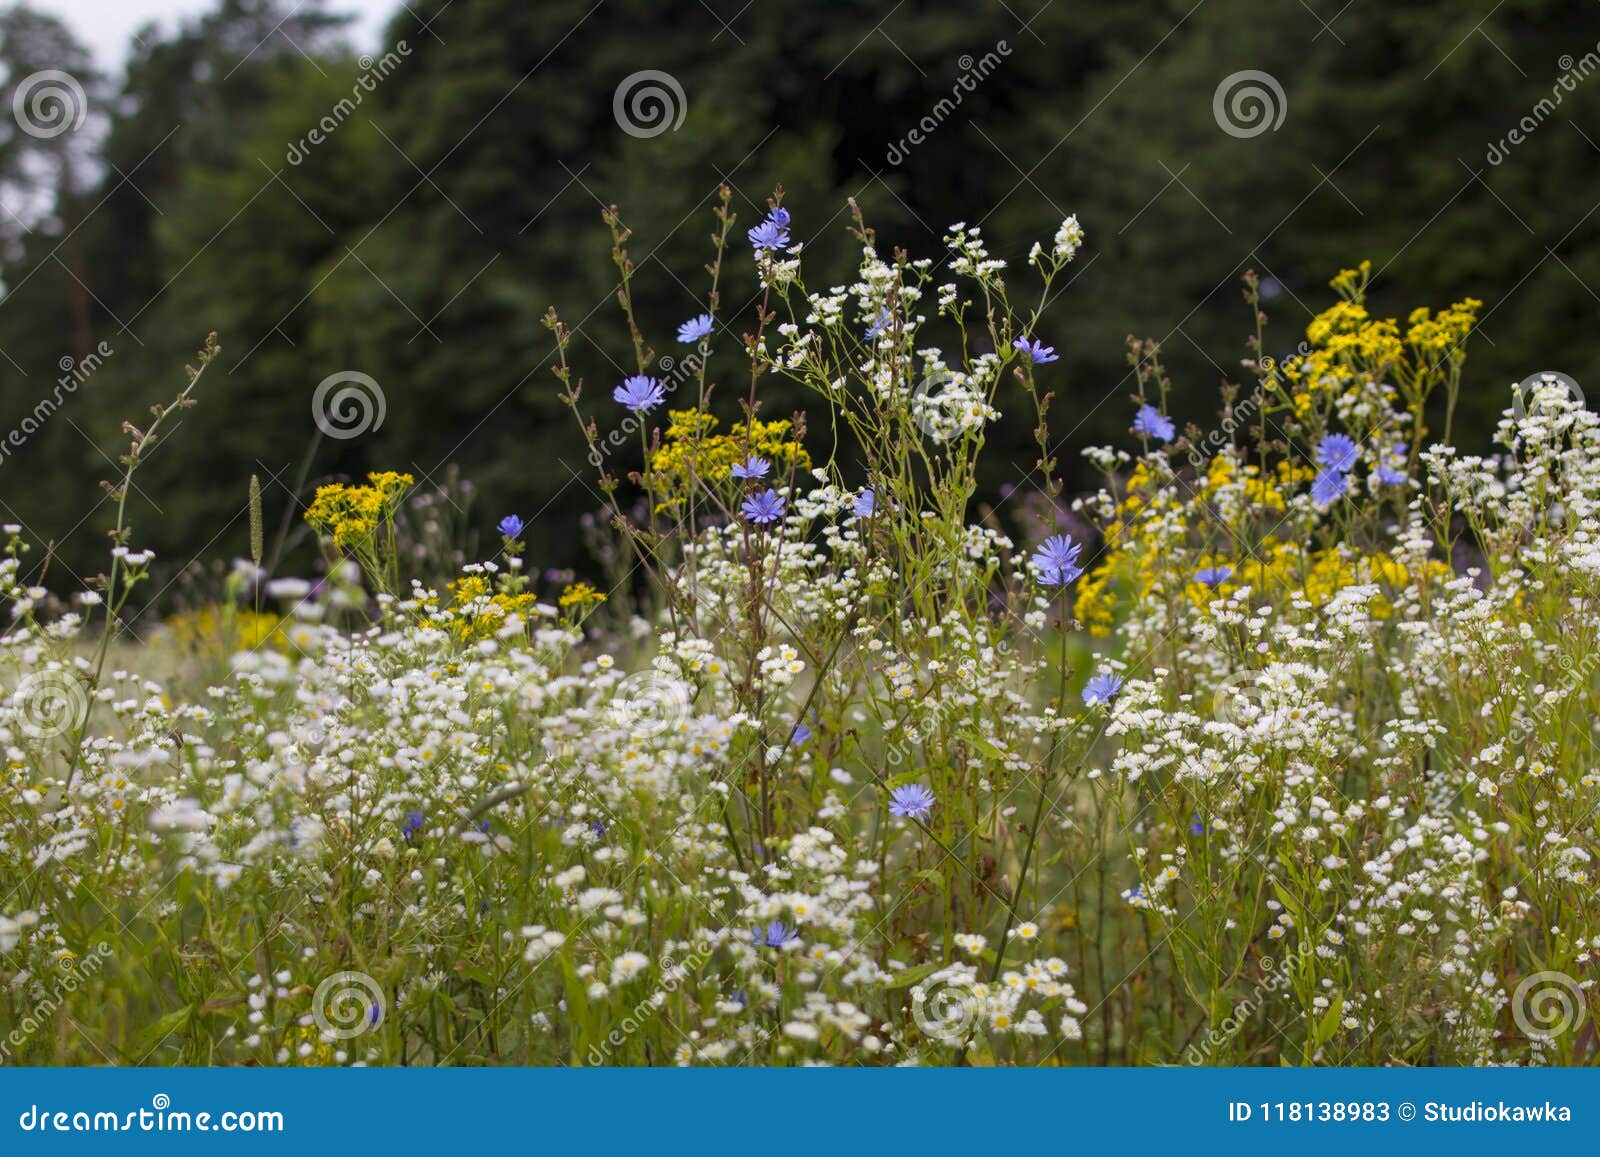 a meadow full of flowers, next to a forest